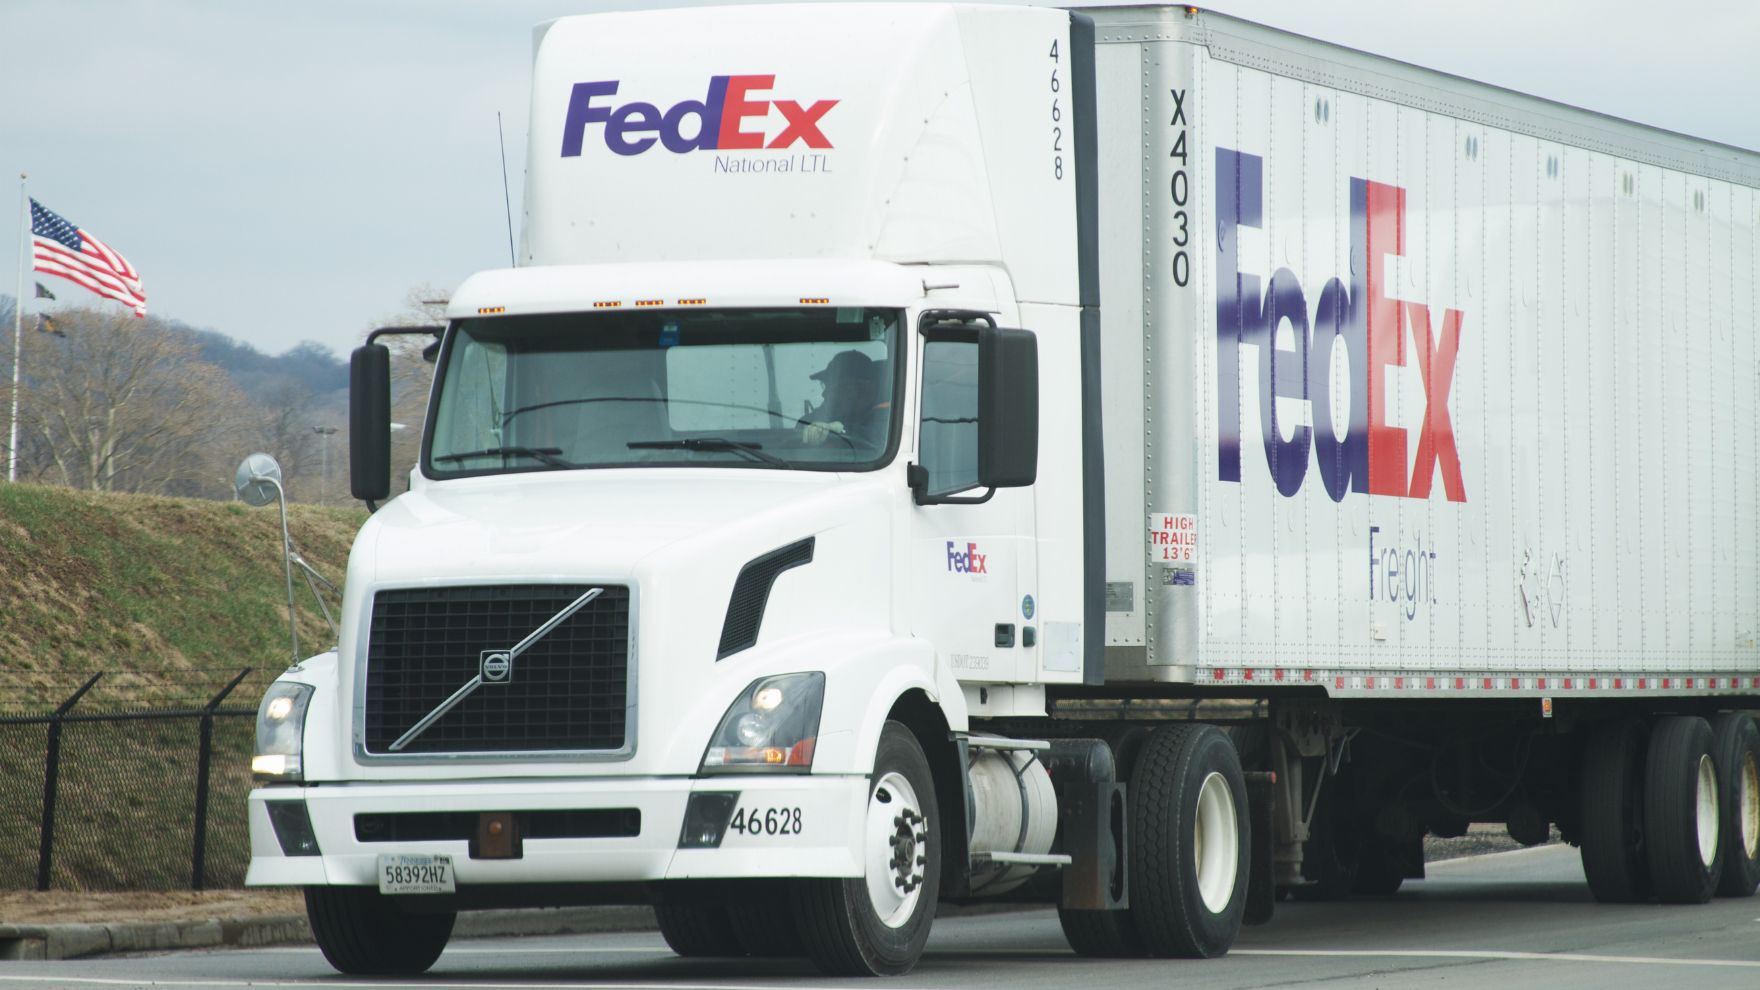 A More Comprehensive Look at FedEx Freight's Decision to Close 29 Service Centers